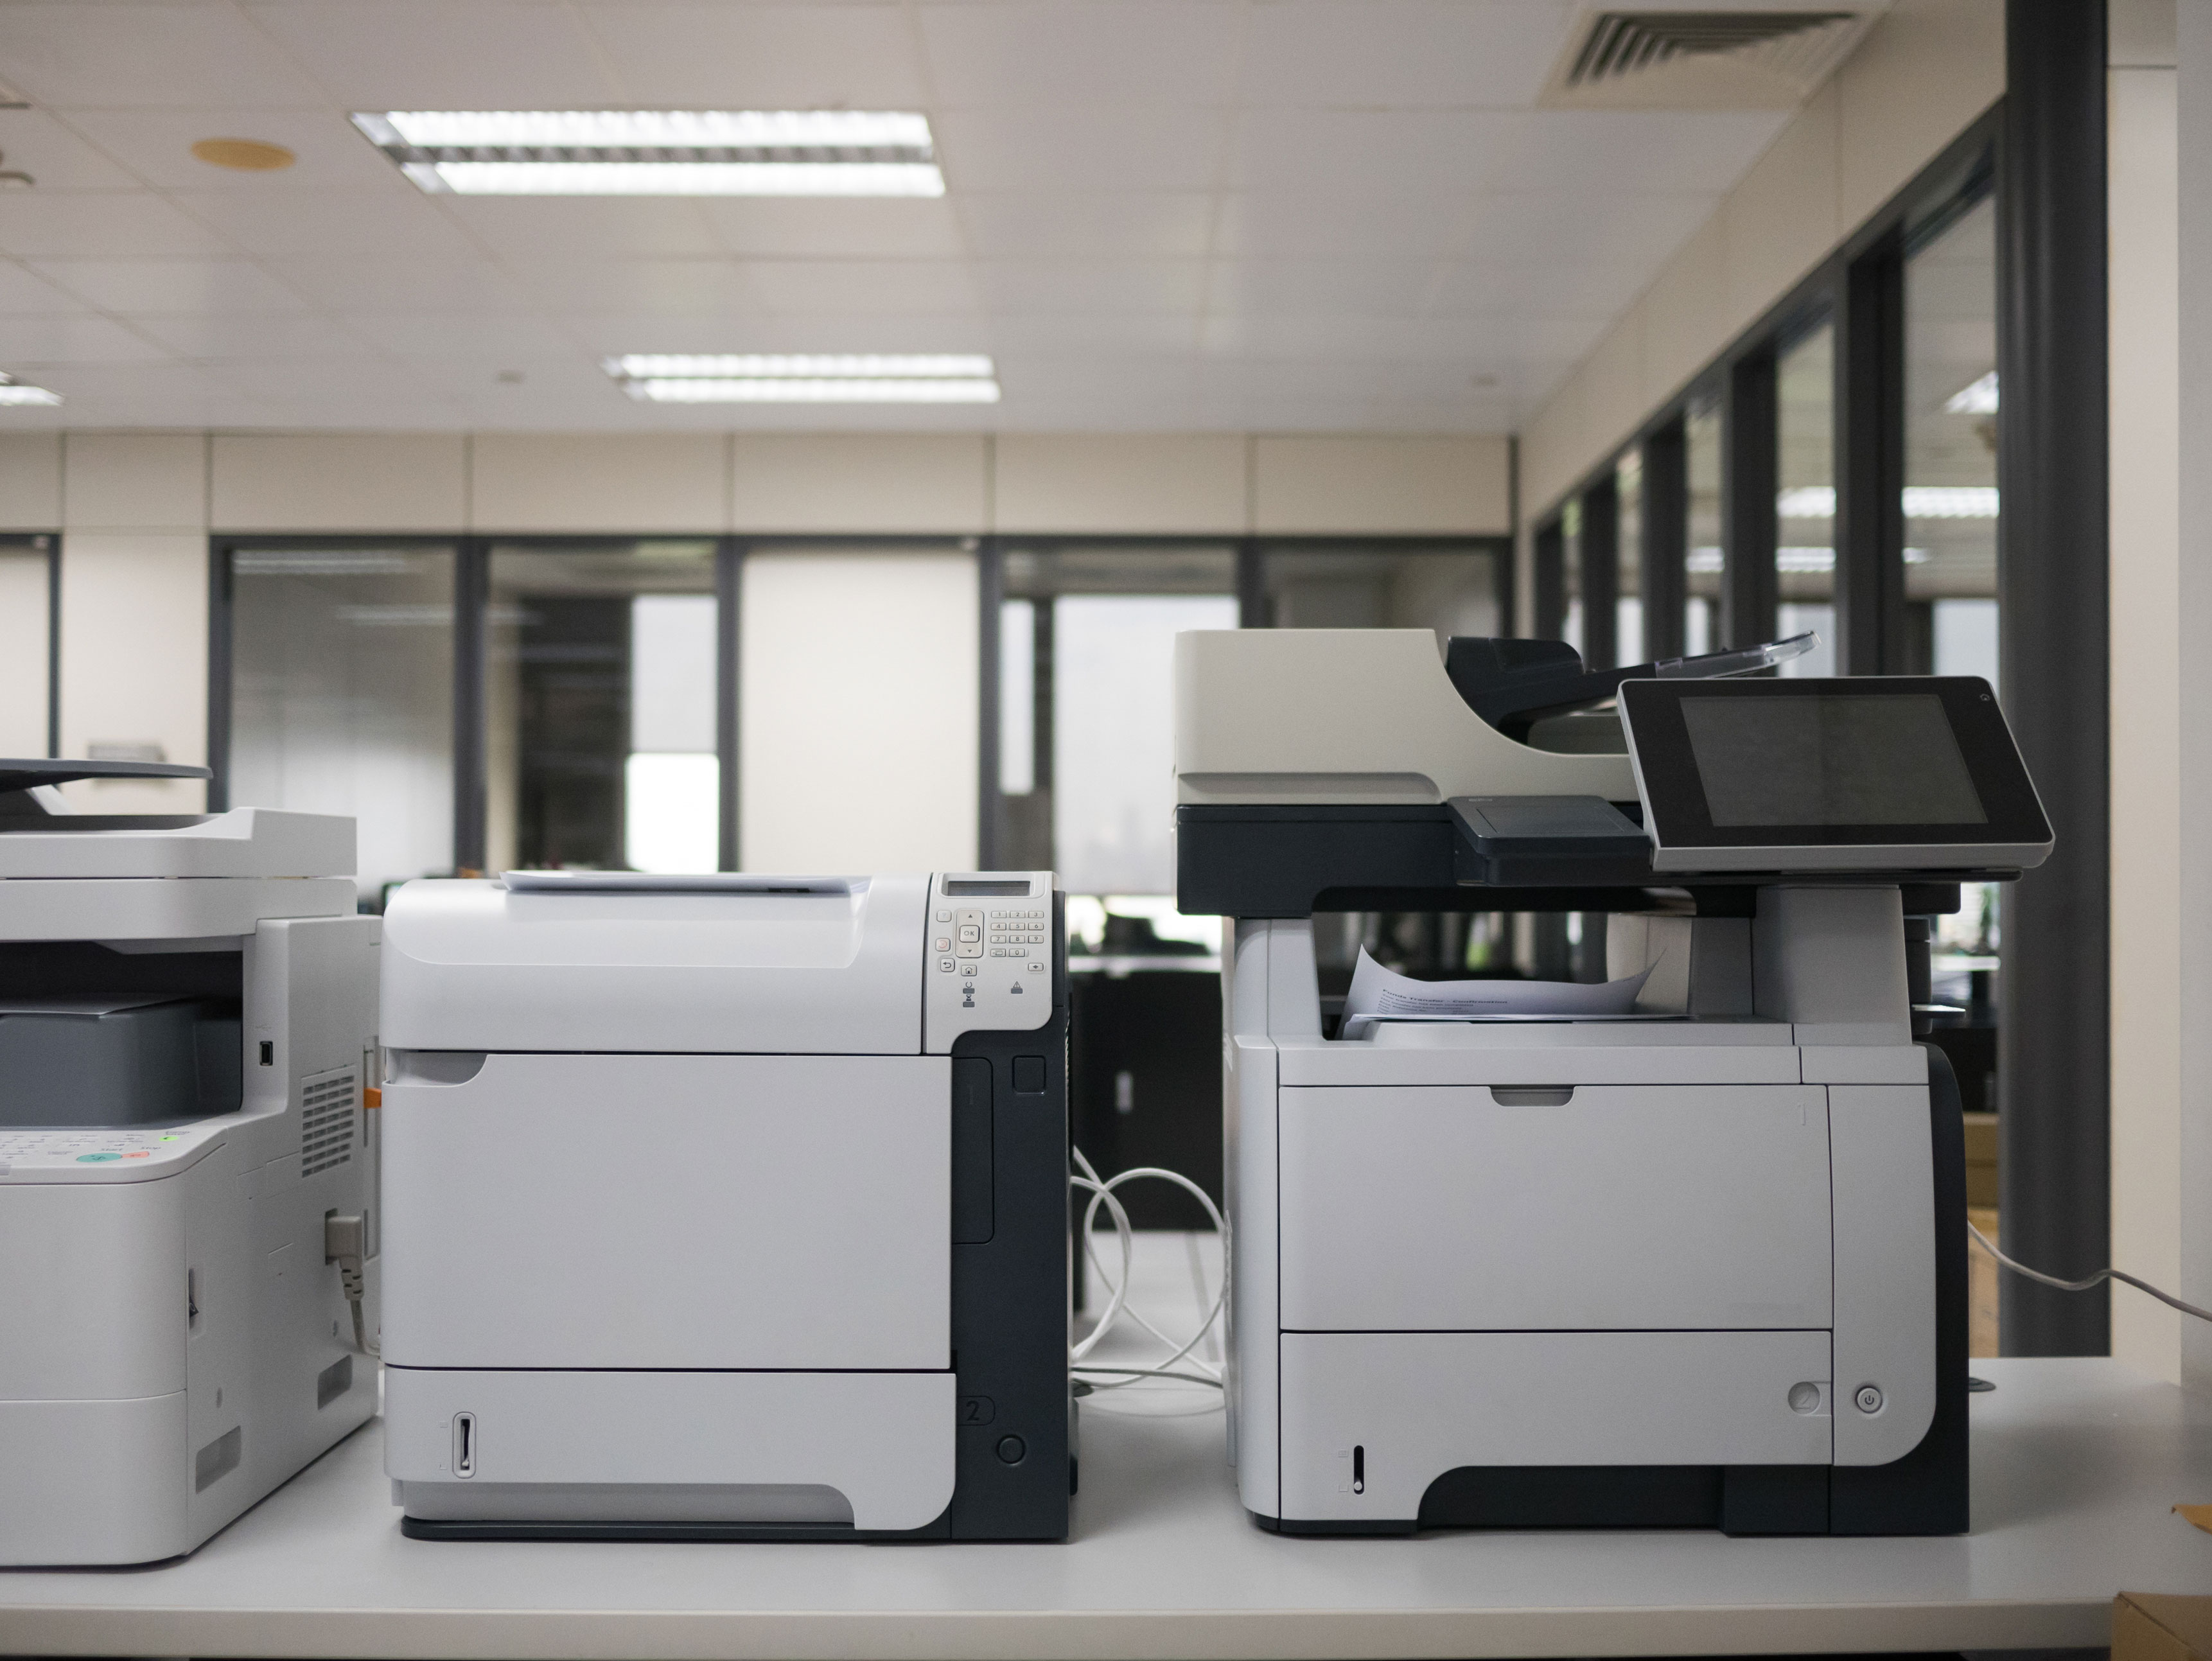 Top 5 ways to get rid of an old printer